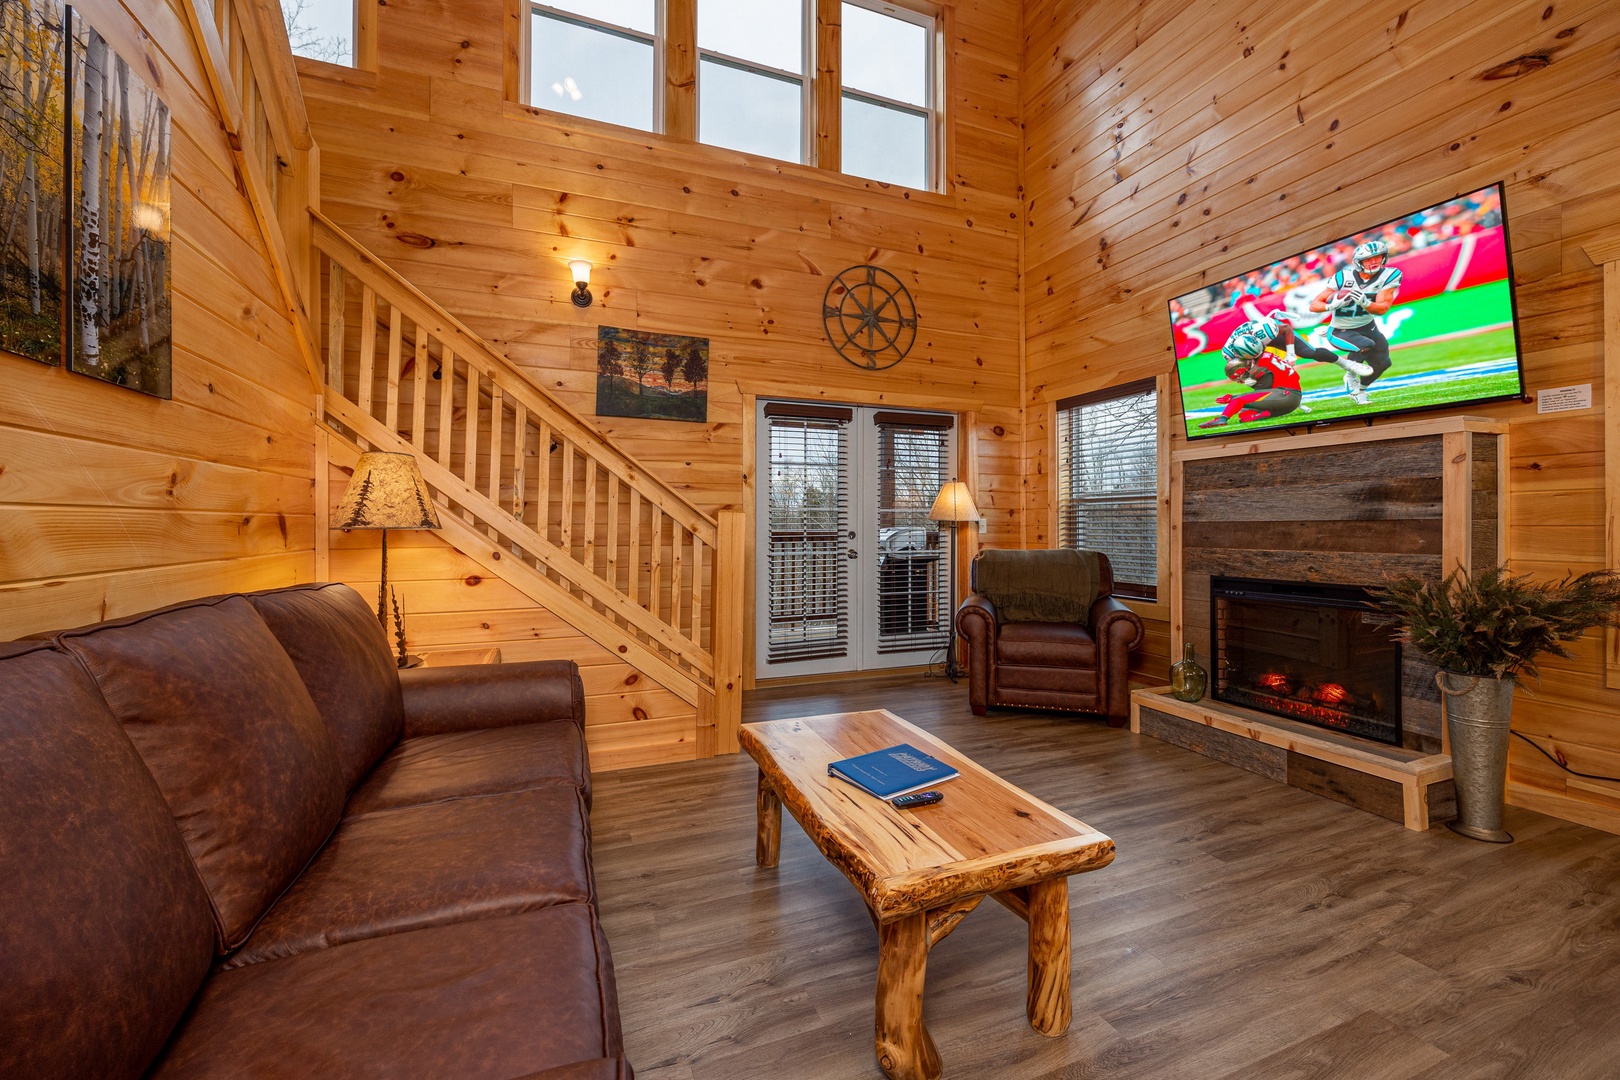 Living room at Mountain Pool & Paradise, a 3 bedroom cabin rental located in Pigeon Forge